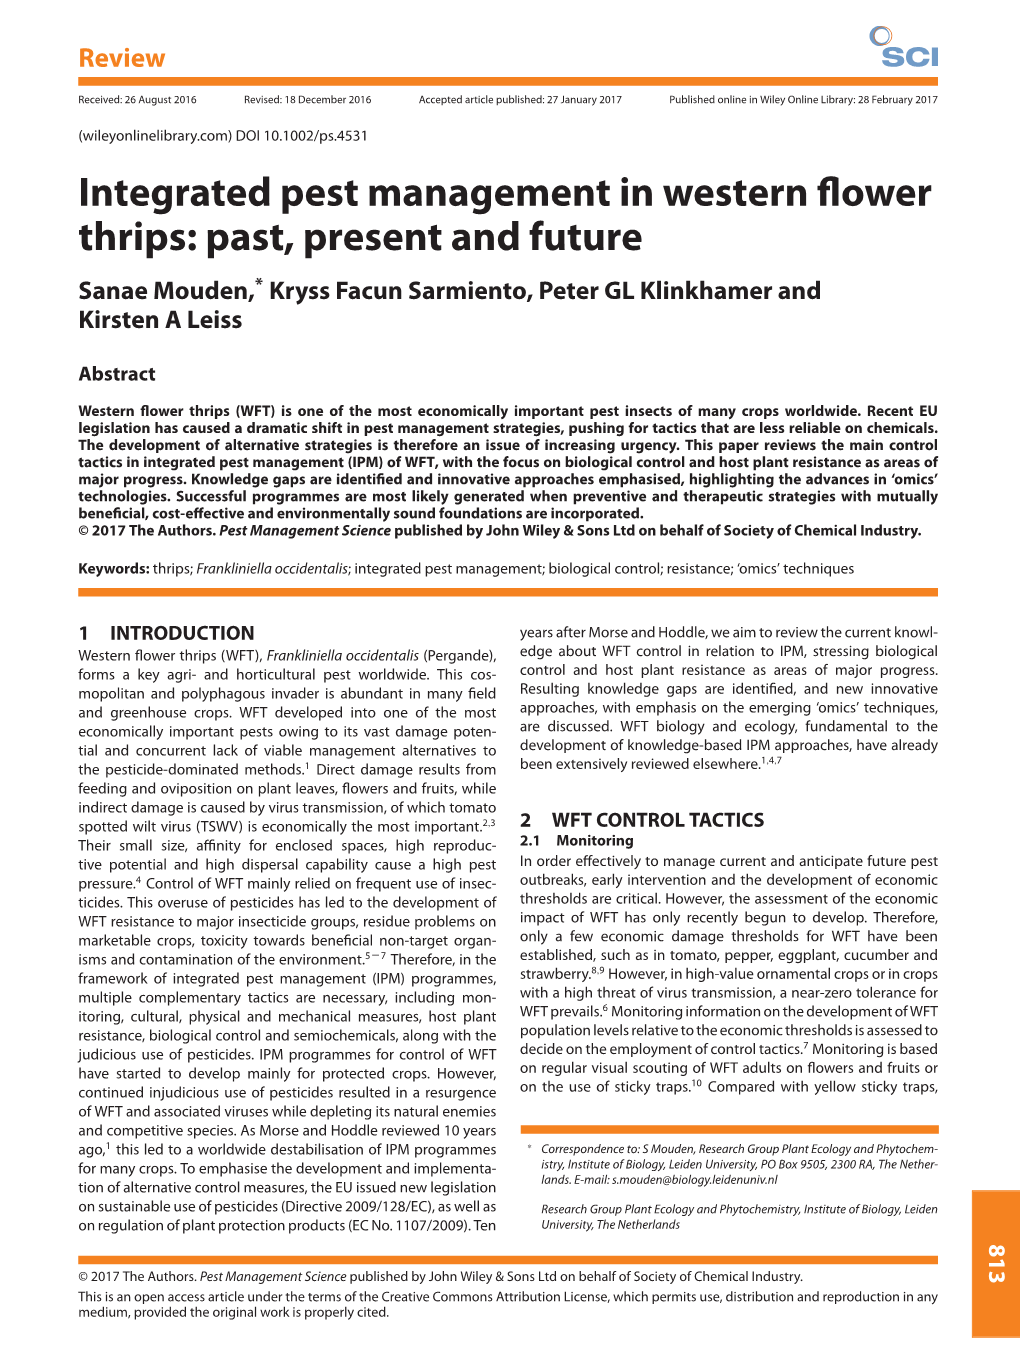 Integrated Pest Management in Western Flower Thrips